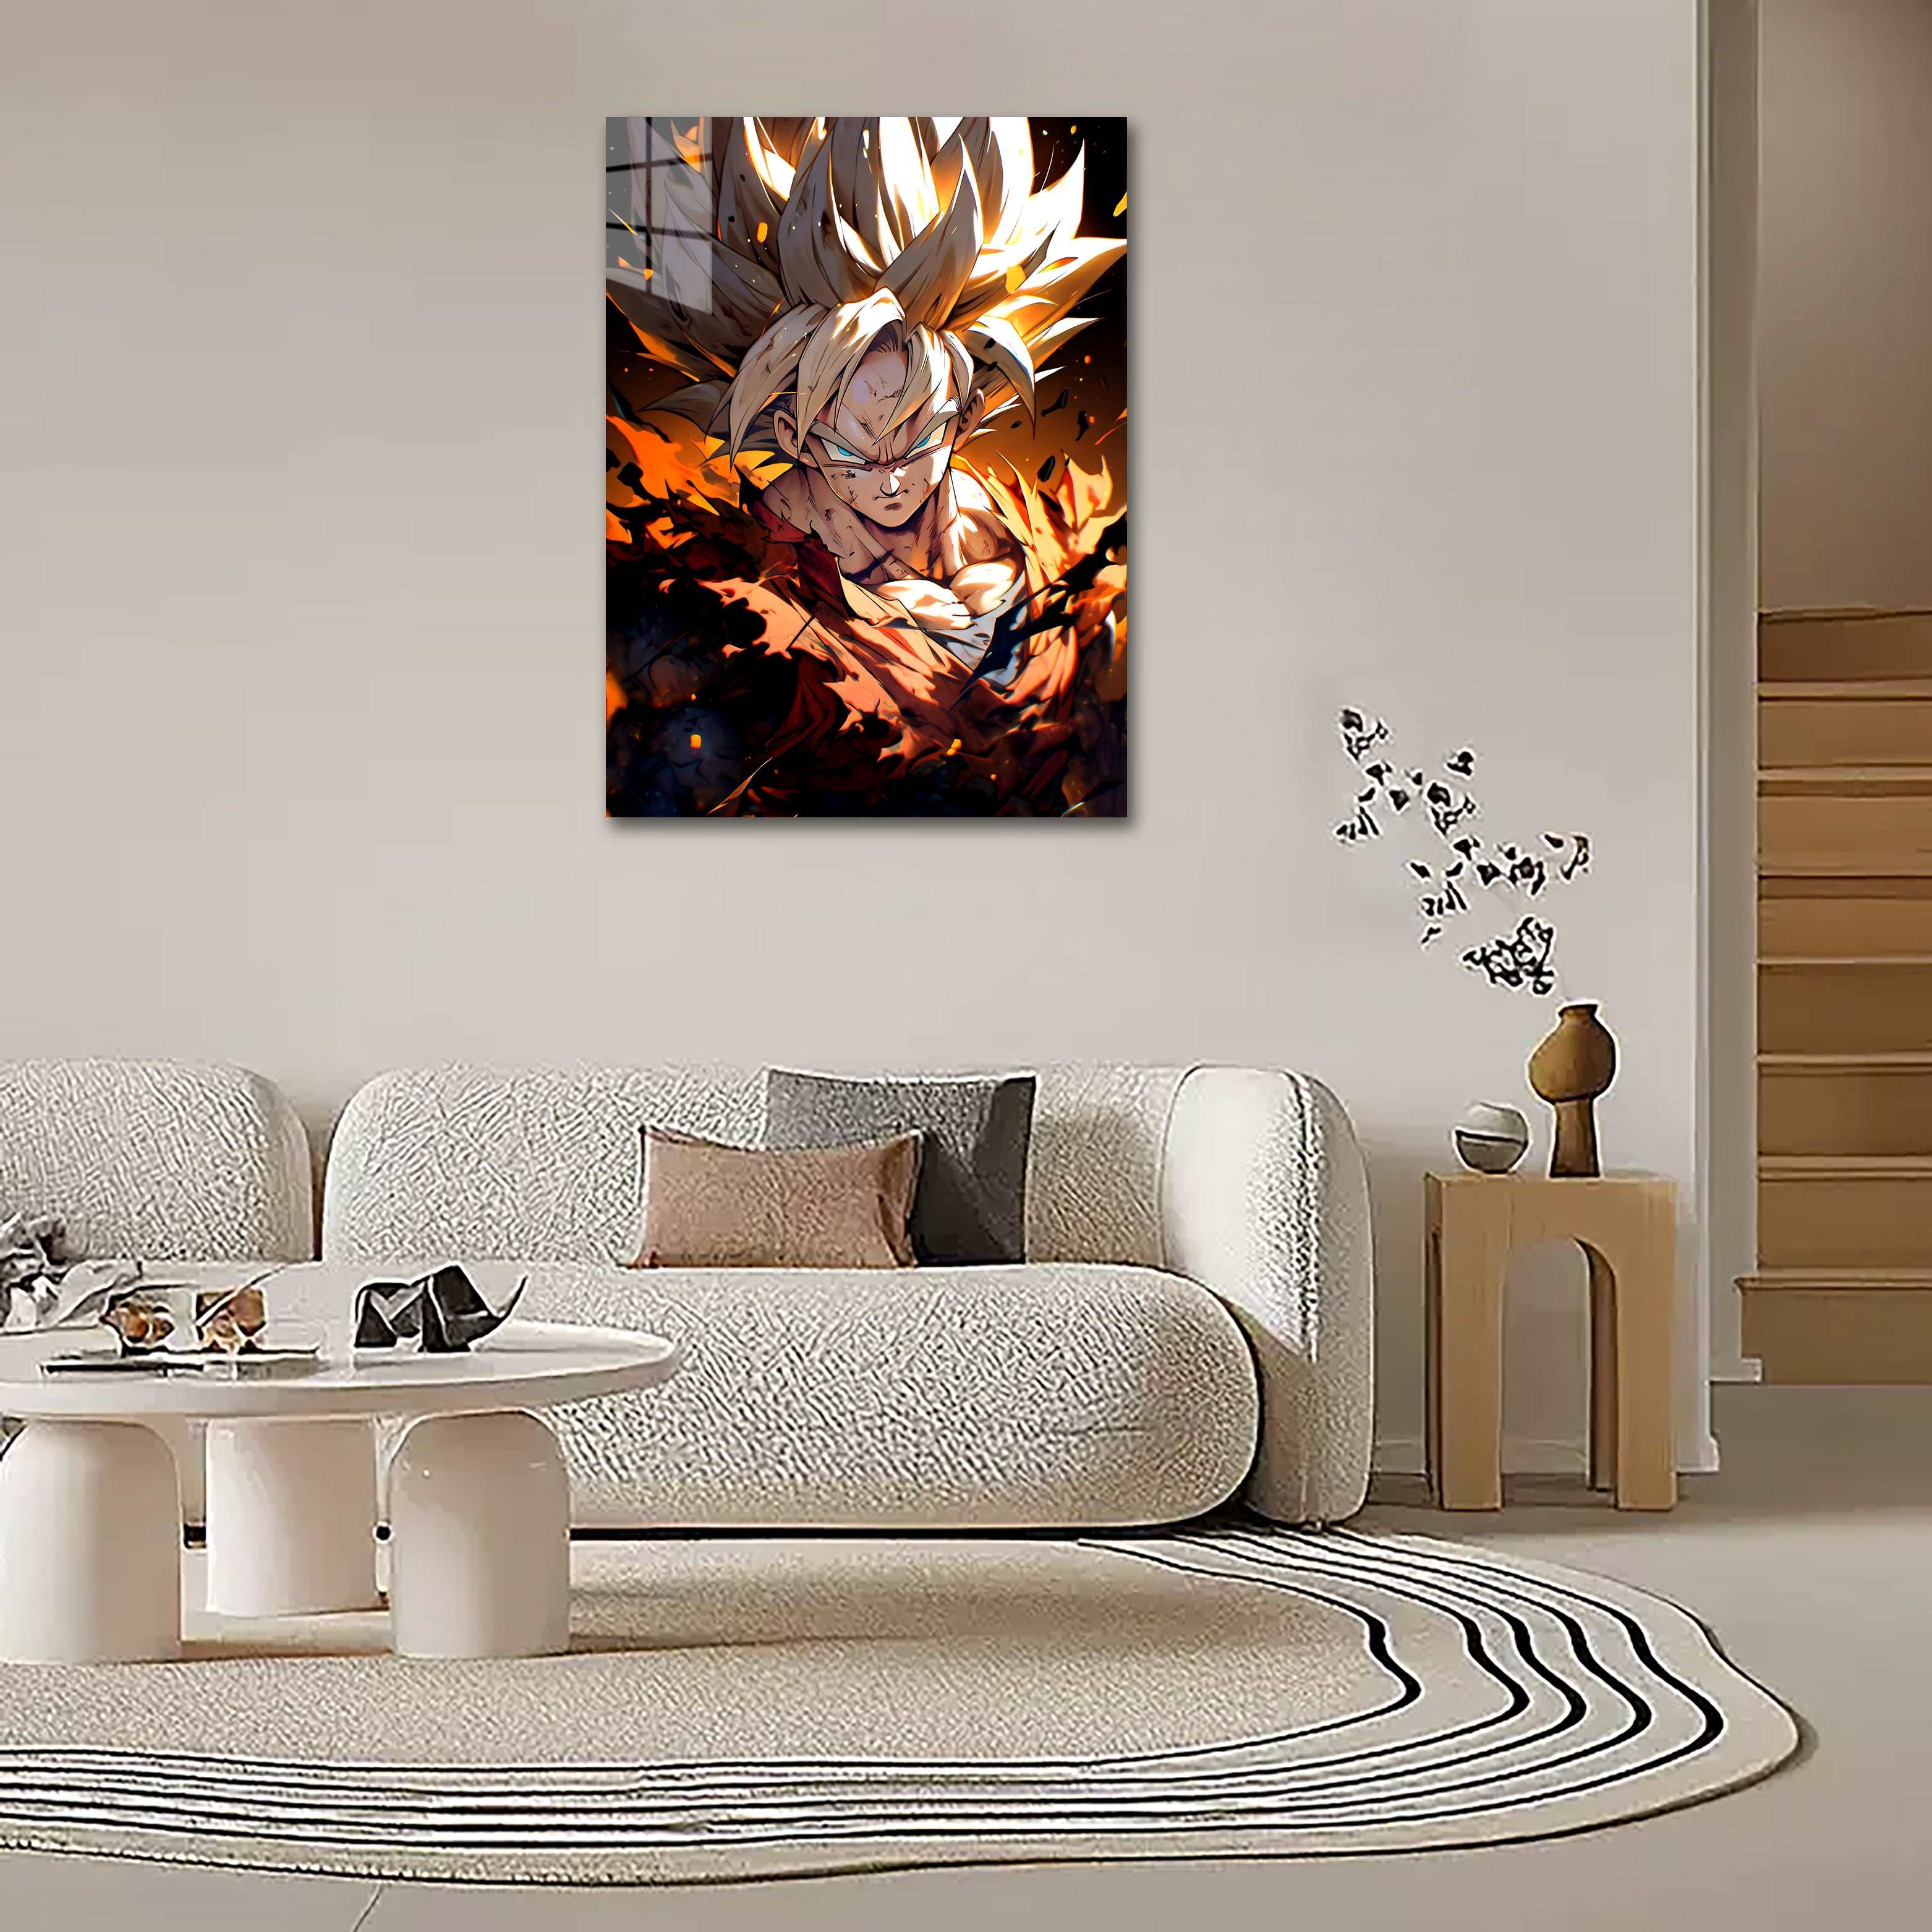 angry goku-Artwork by @By_Monkai